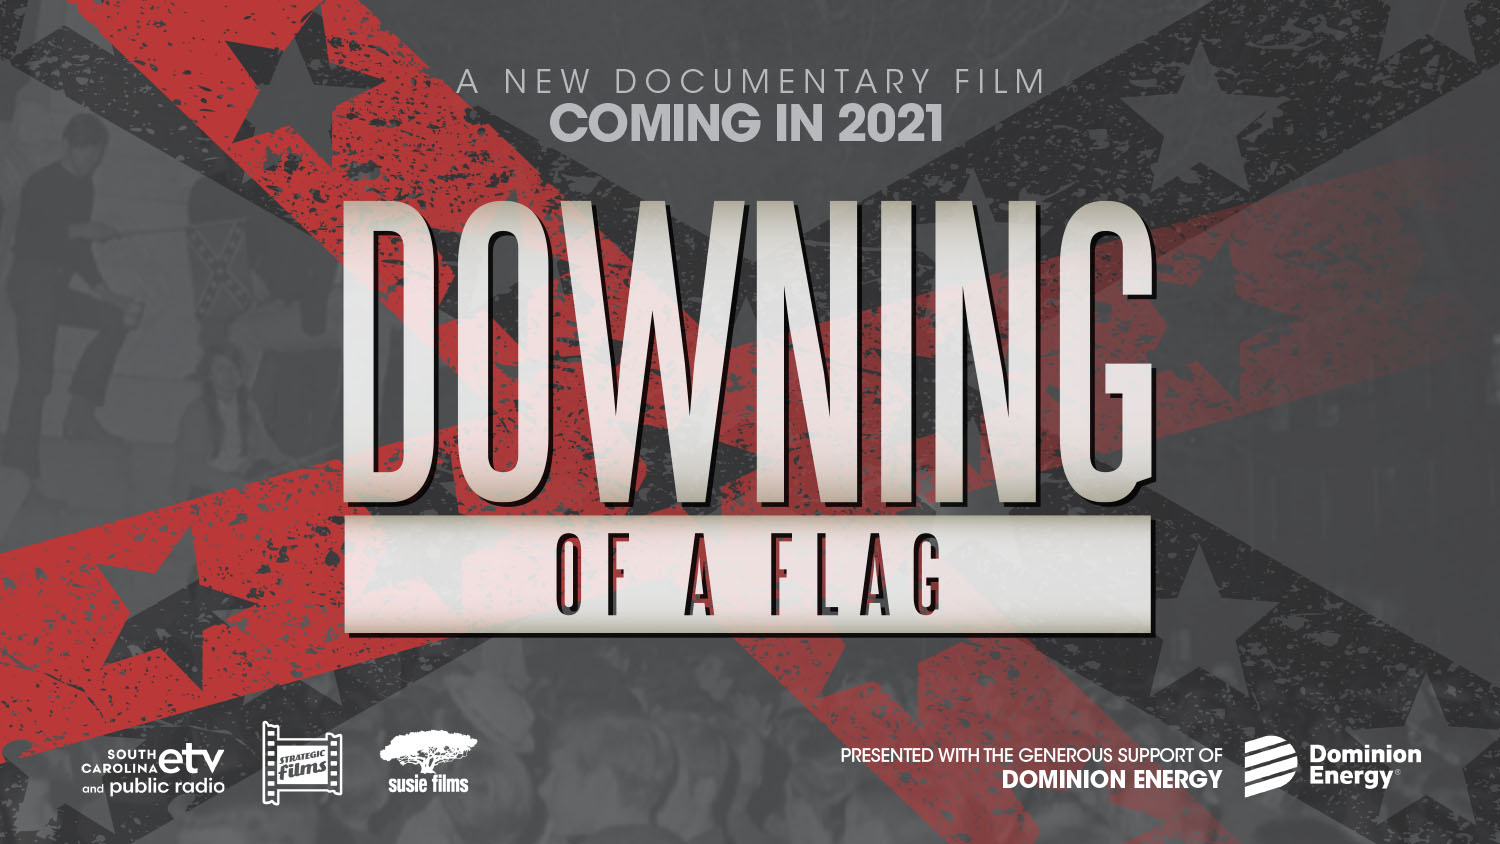 Click to view the film deck for "Downing of a Flag," which will be available through PBS Plus in 2021. Deck includes production photos, project overview, a link to preview reel, and more.